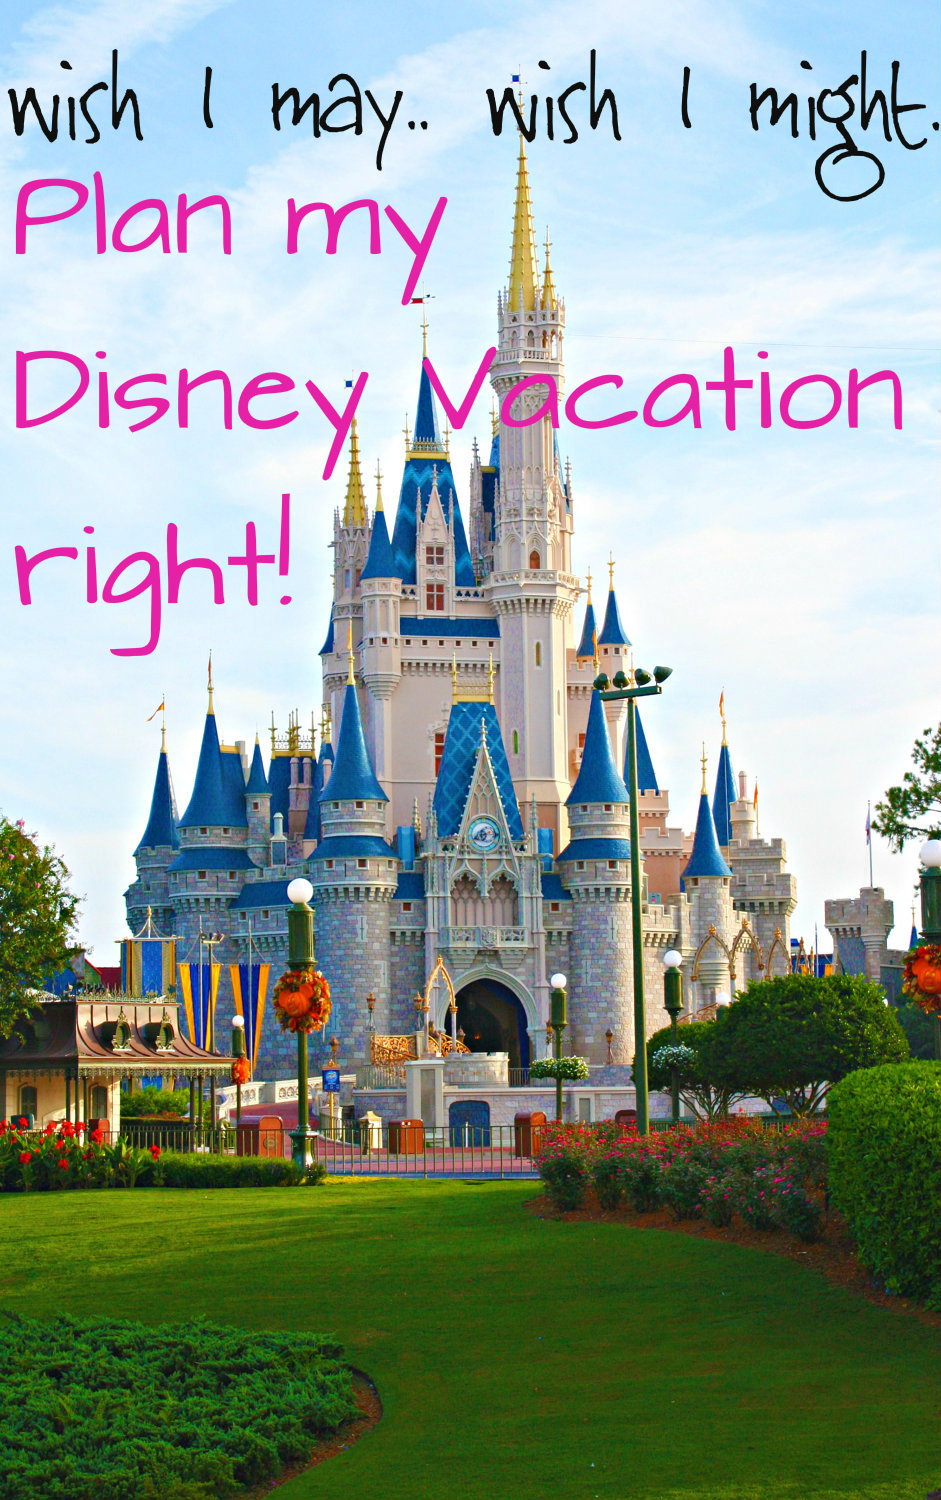 Choosing which Disney Vacation options is right for you